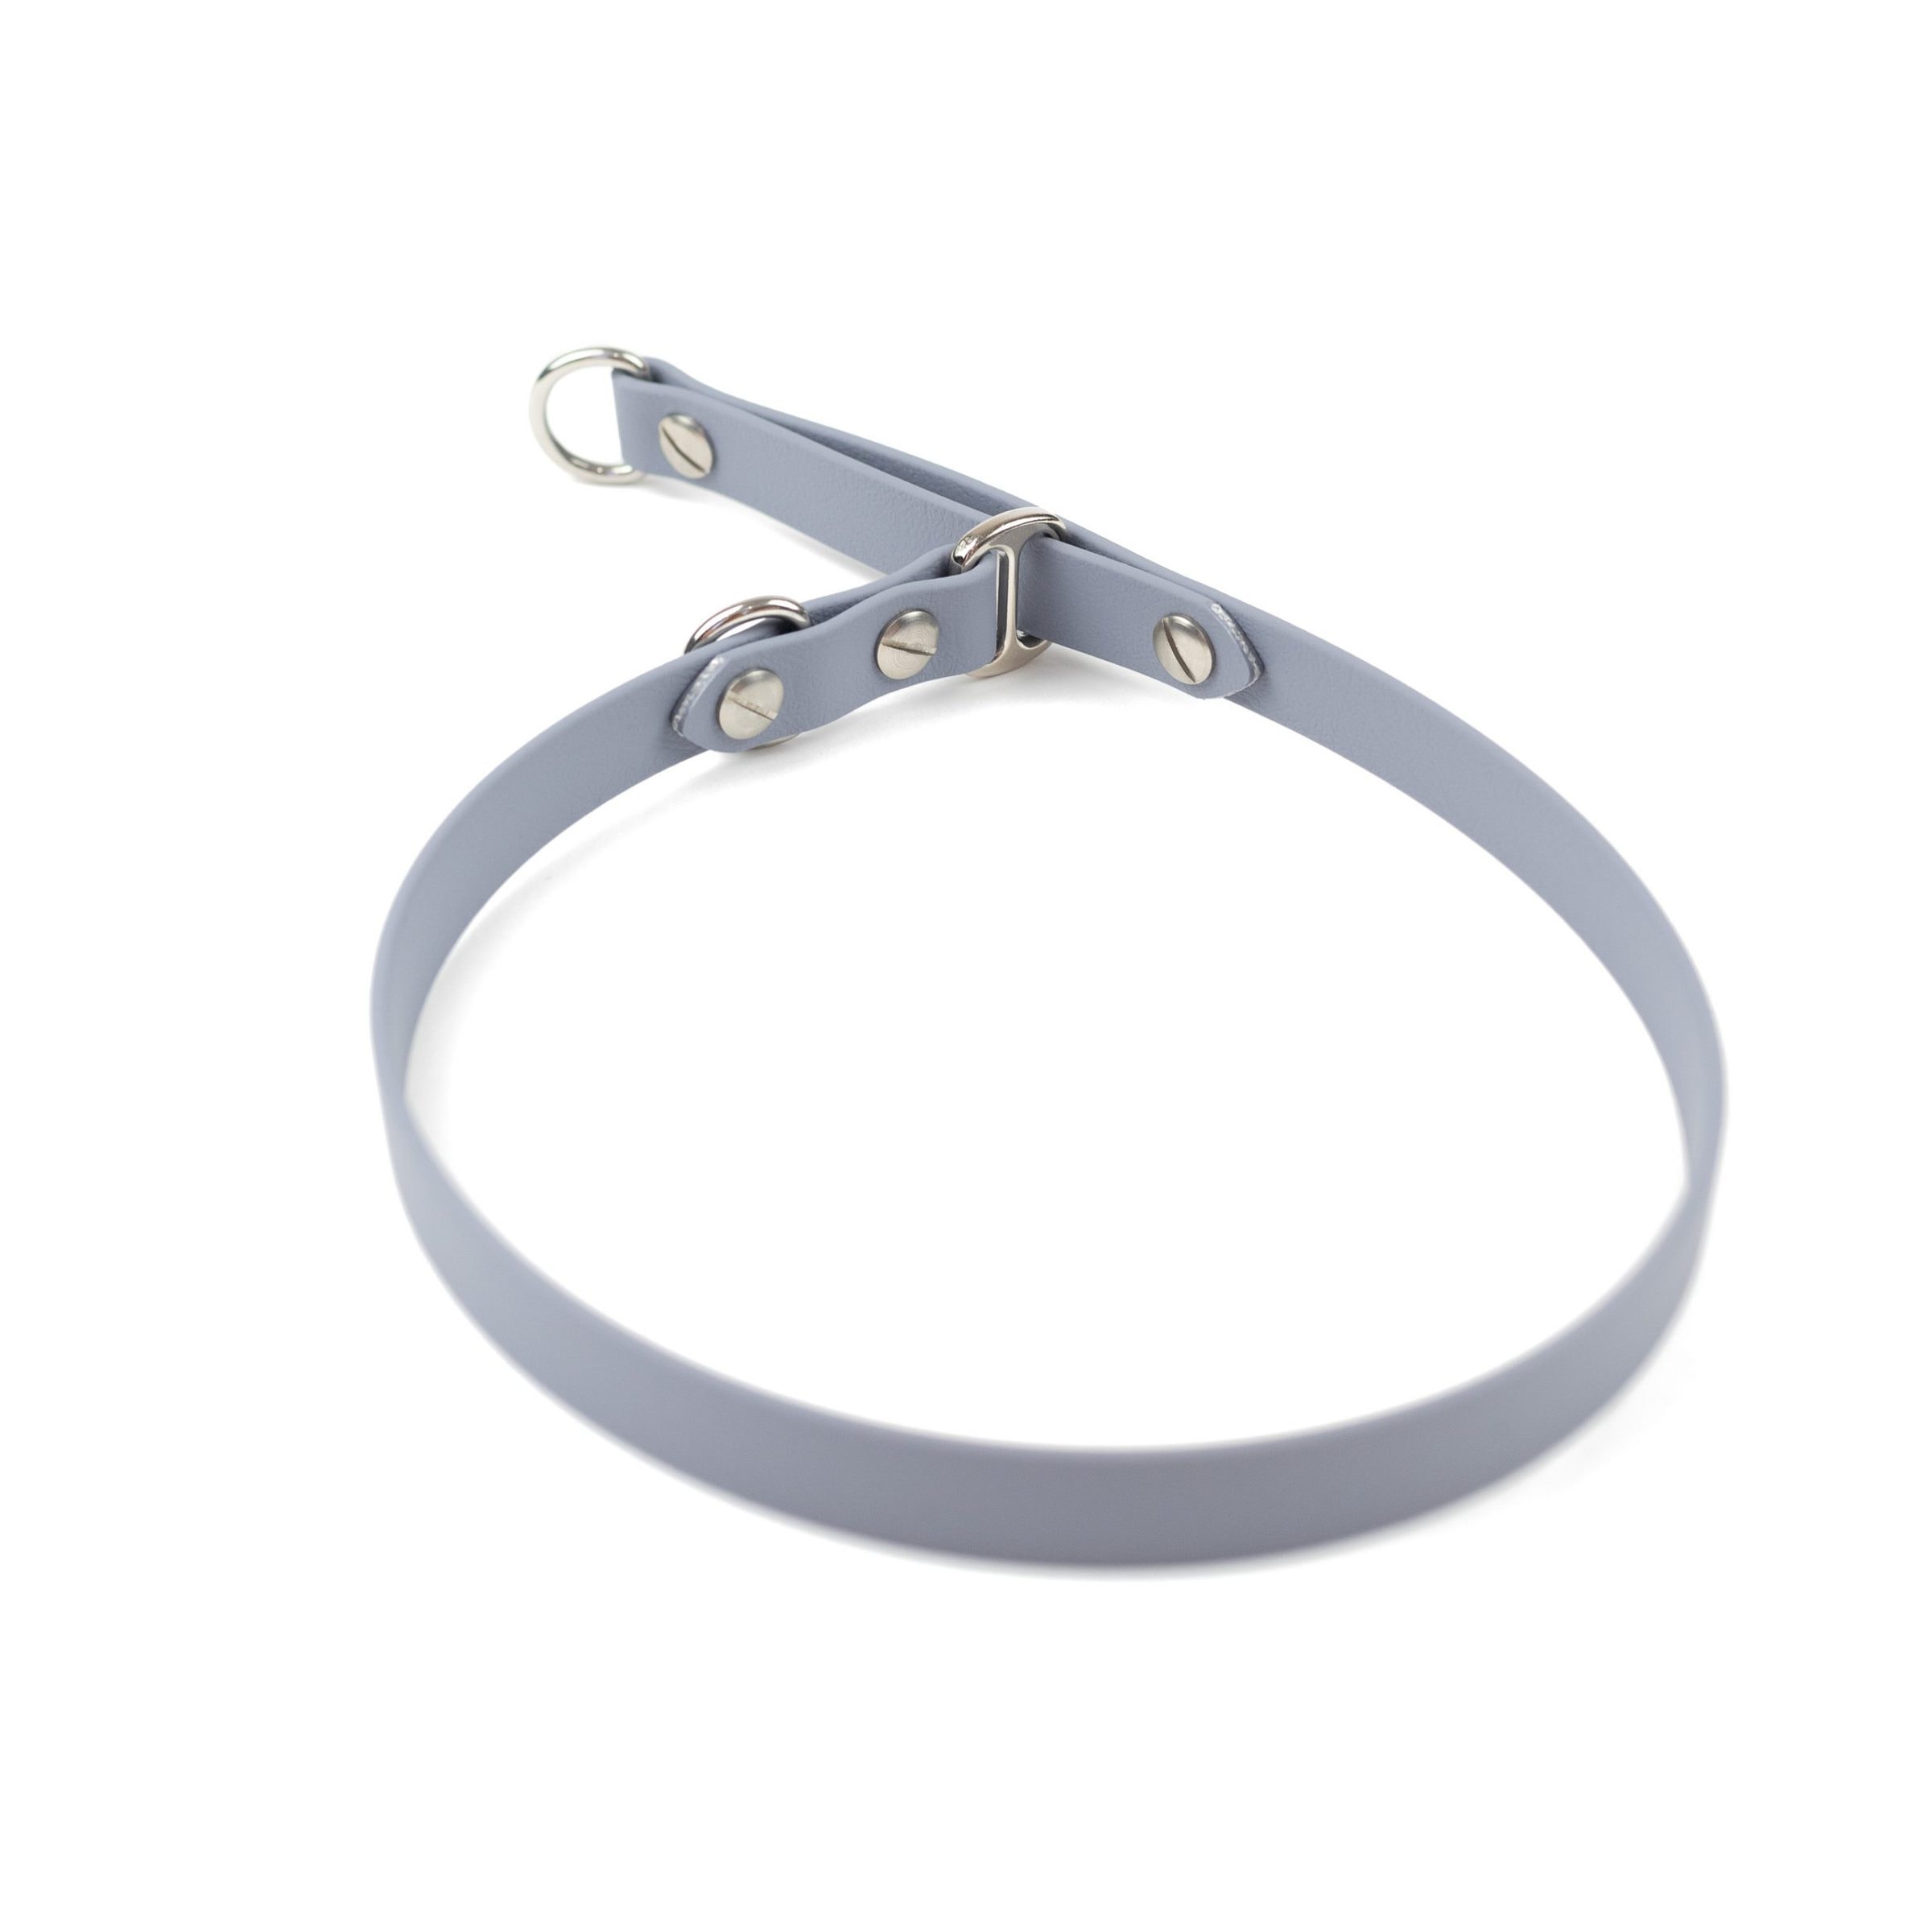 grey 5/8" classic limited slip collar in stainless steel